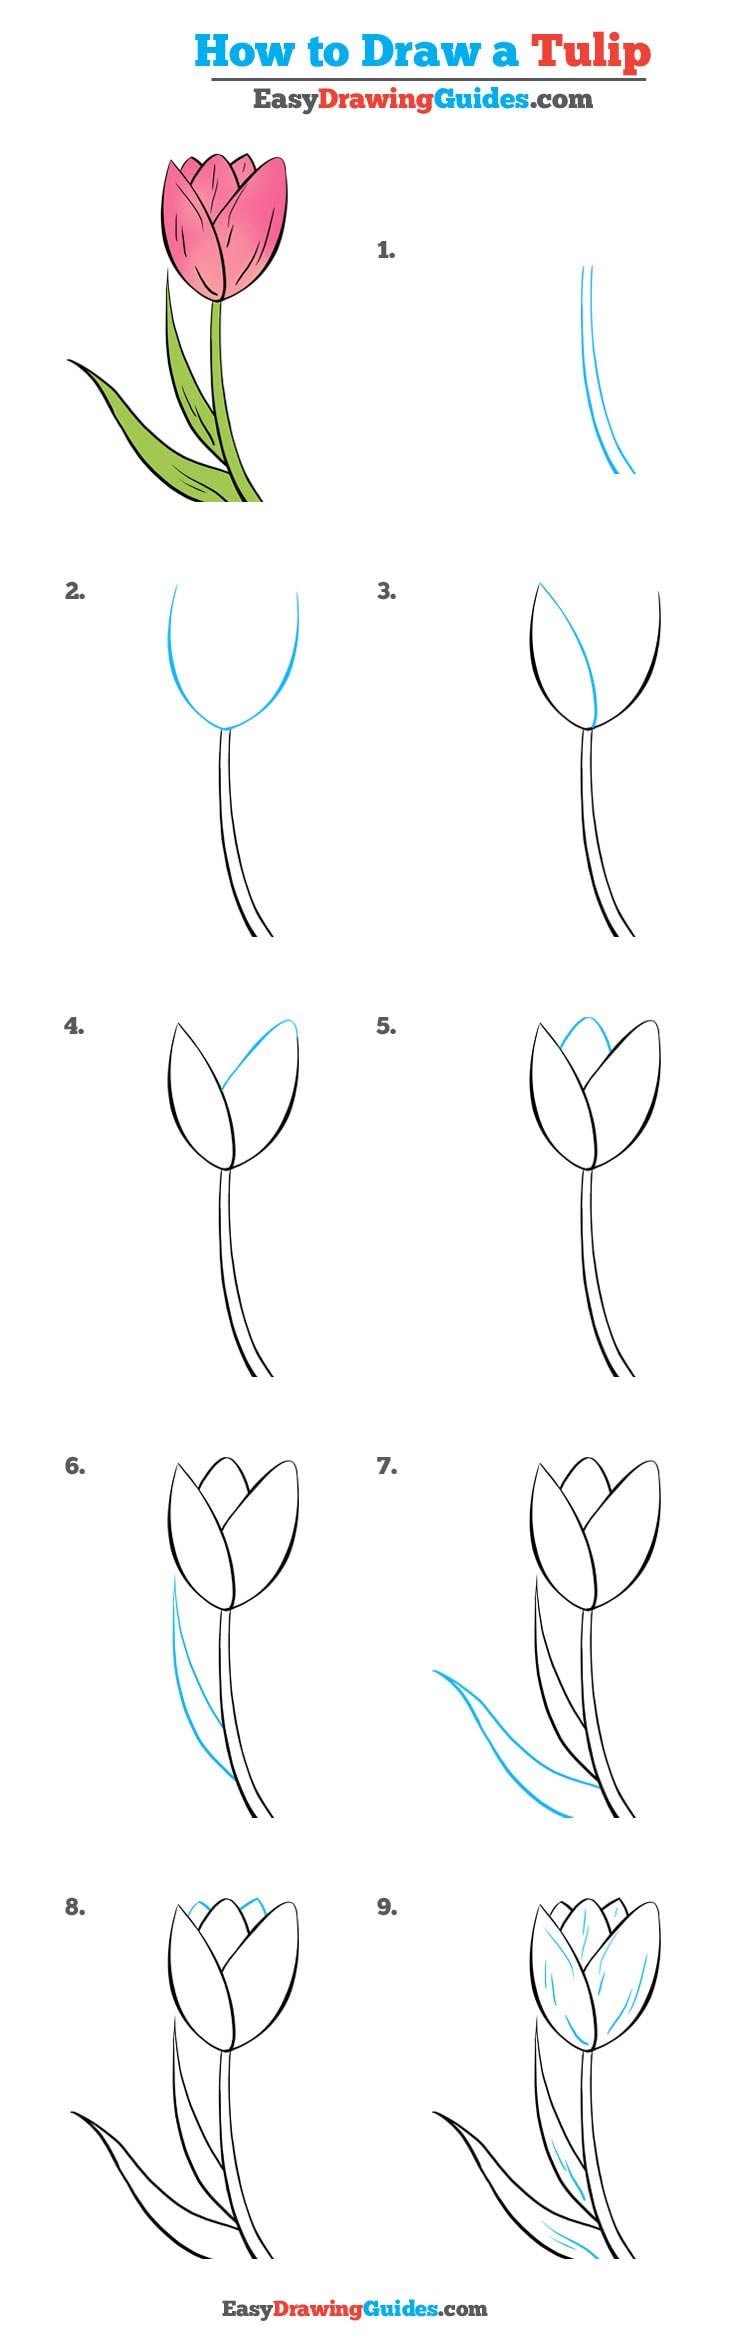 Easy Drawing Flowers Rose Just Fresh Pics Imane Buzz Check out the youtube link given. easy drawing flowers rose just fresh